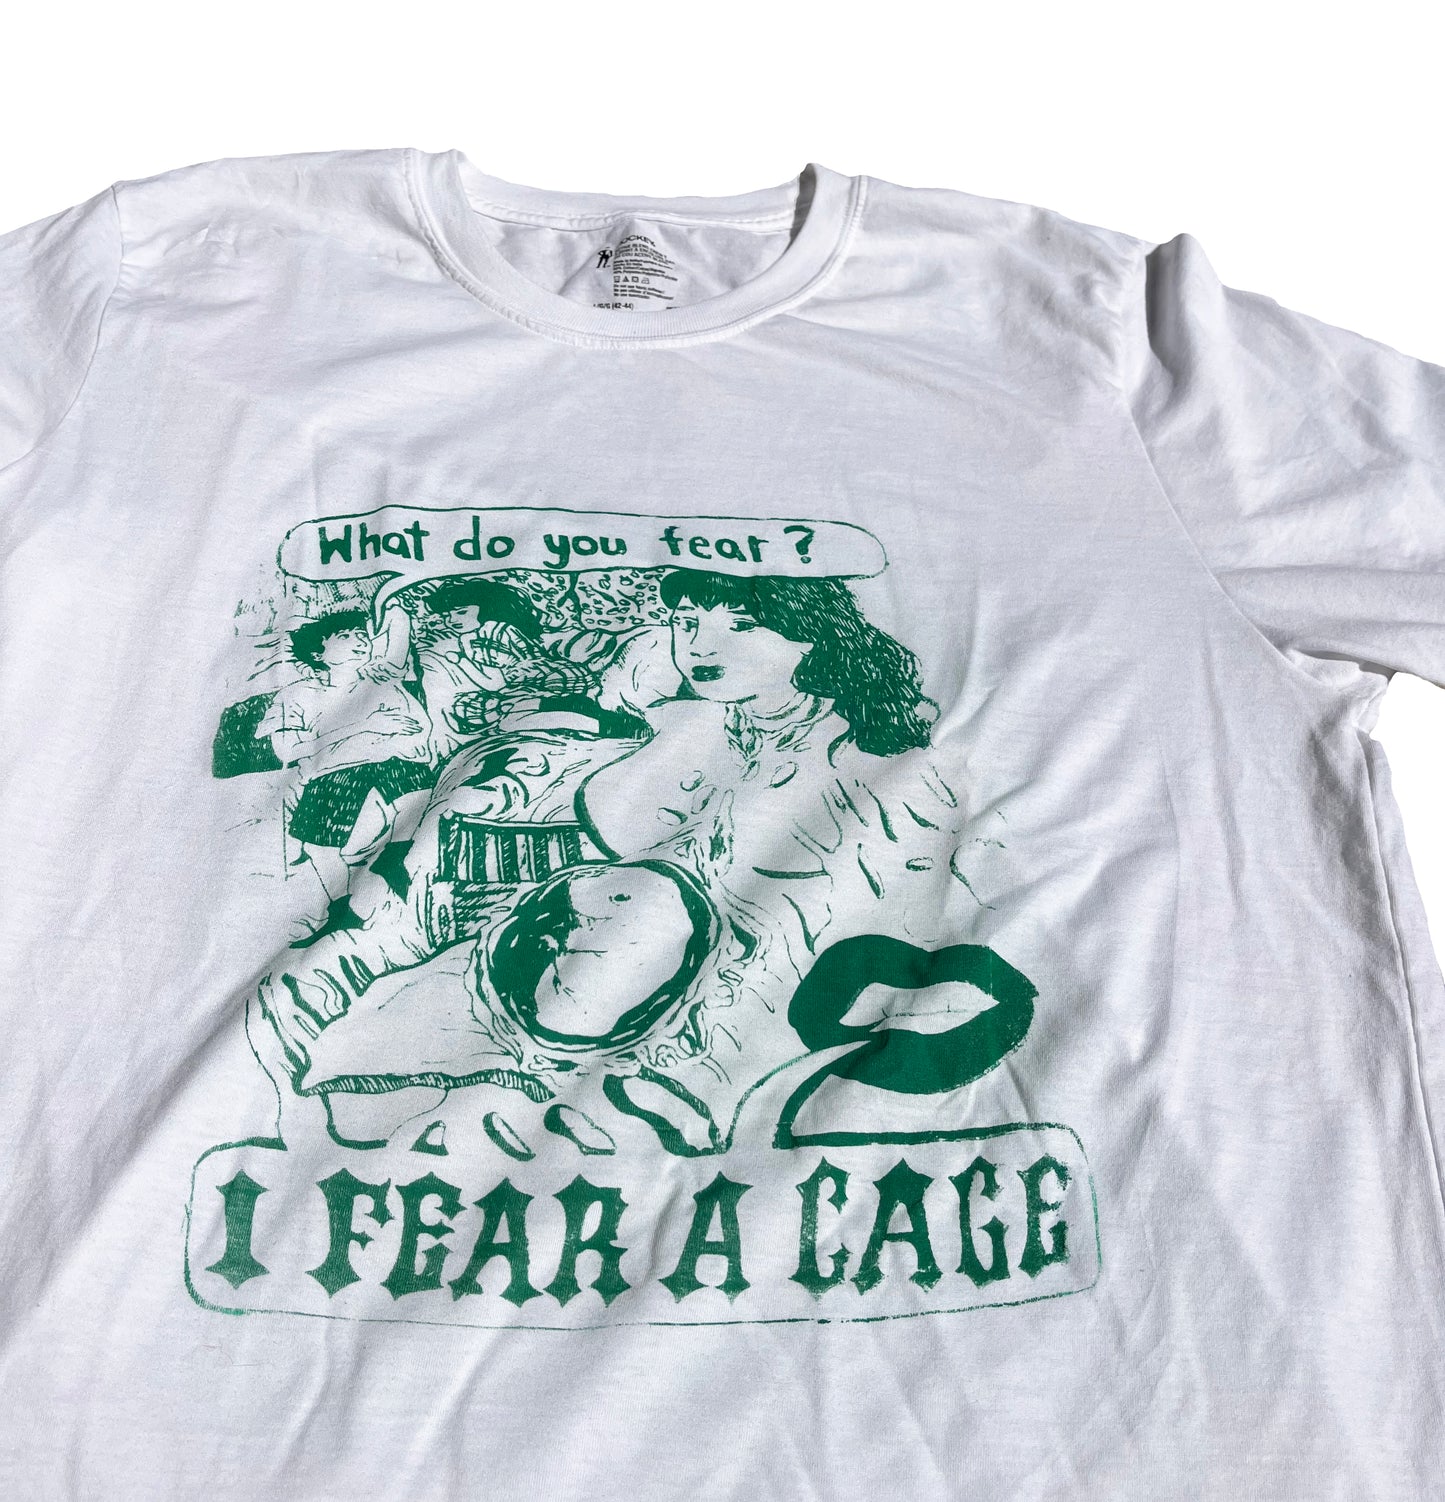 Large I Fear A Cage 03 Graphic Tee Shirt